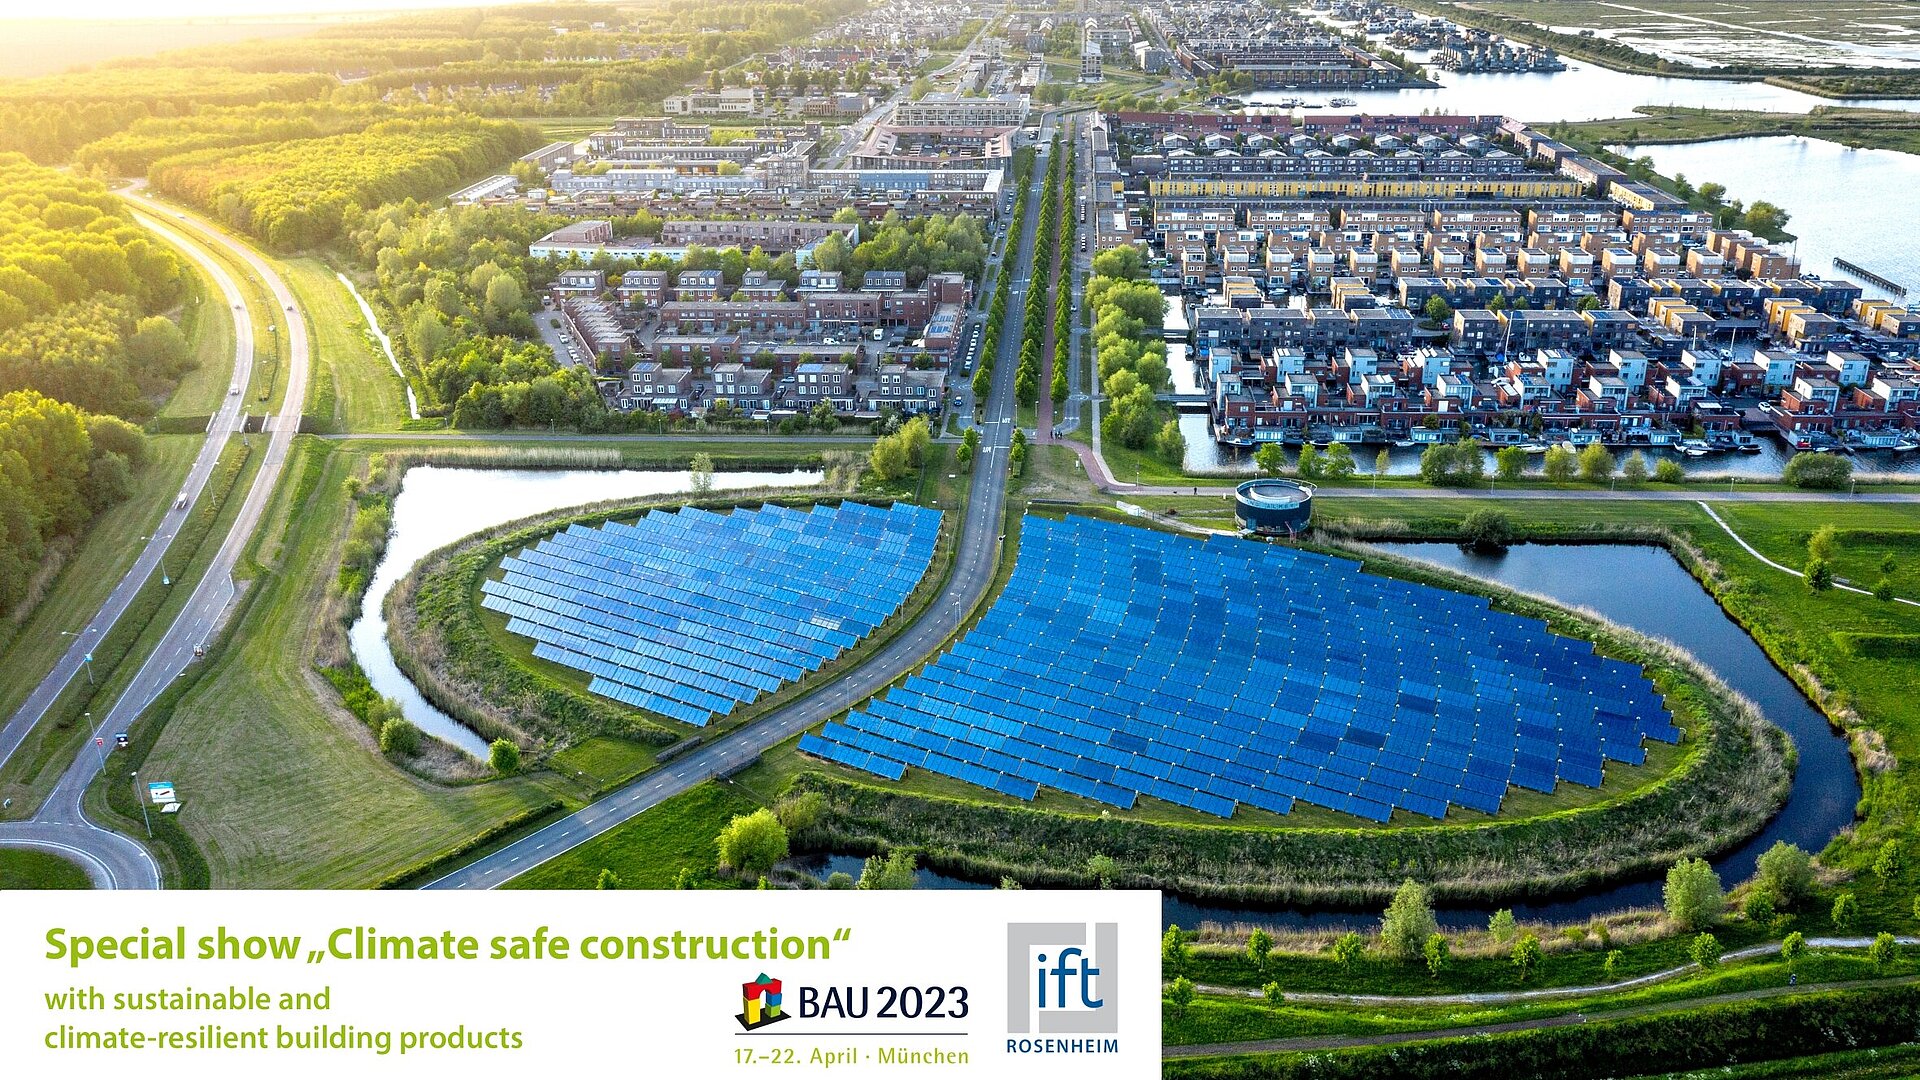 Large photovoltaic plant and housing estates surrounded by green landscape.  